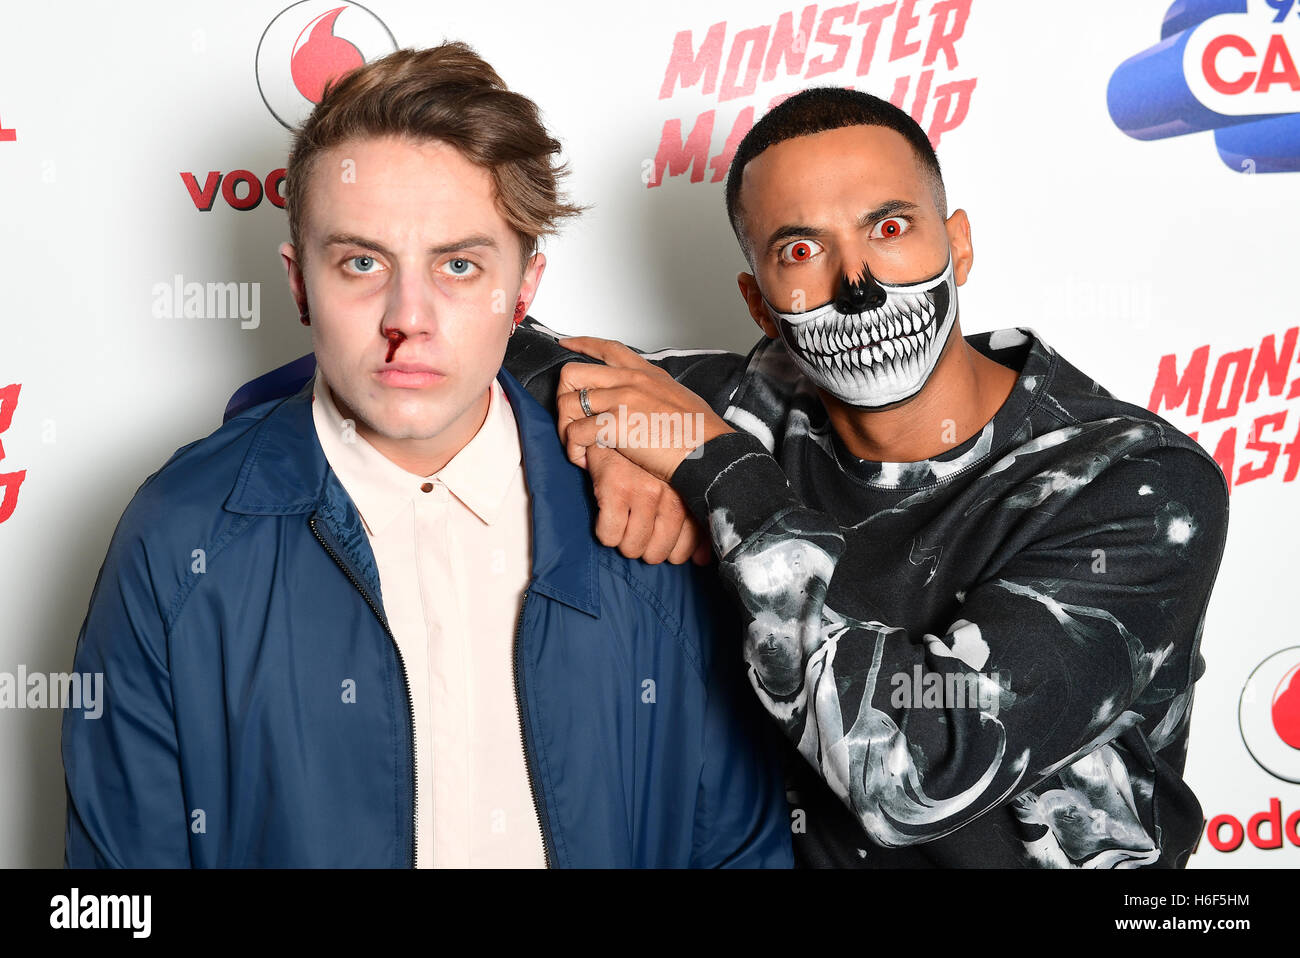 Capital FM's Roman Kemp (left), dressed as Eleven from Stranger Things, and Marvin Humes attending Capital's Monster Mash-Up with Vodafone at the Eventim Apollo in London. Stock Photo